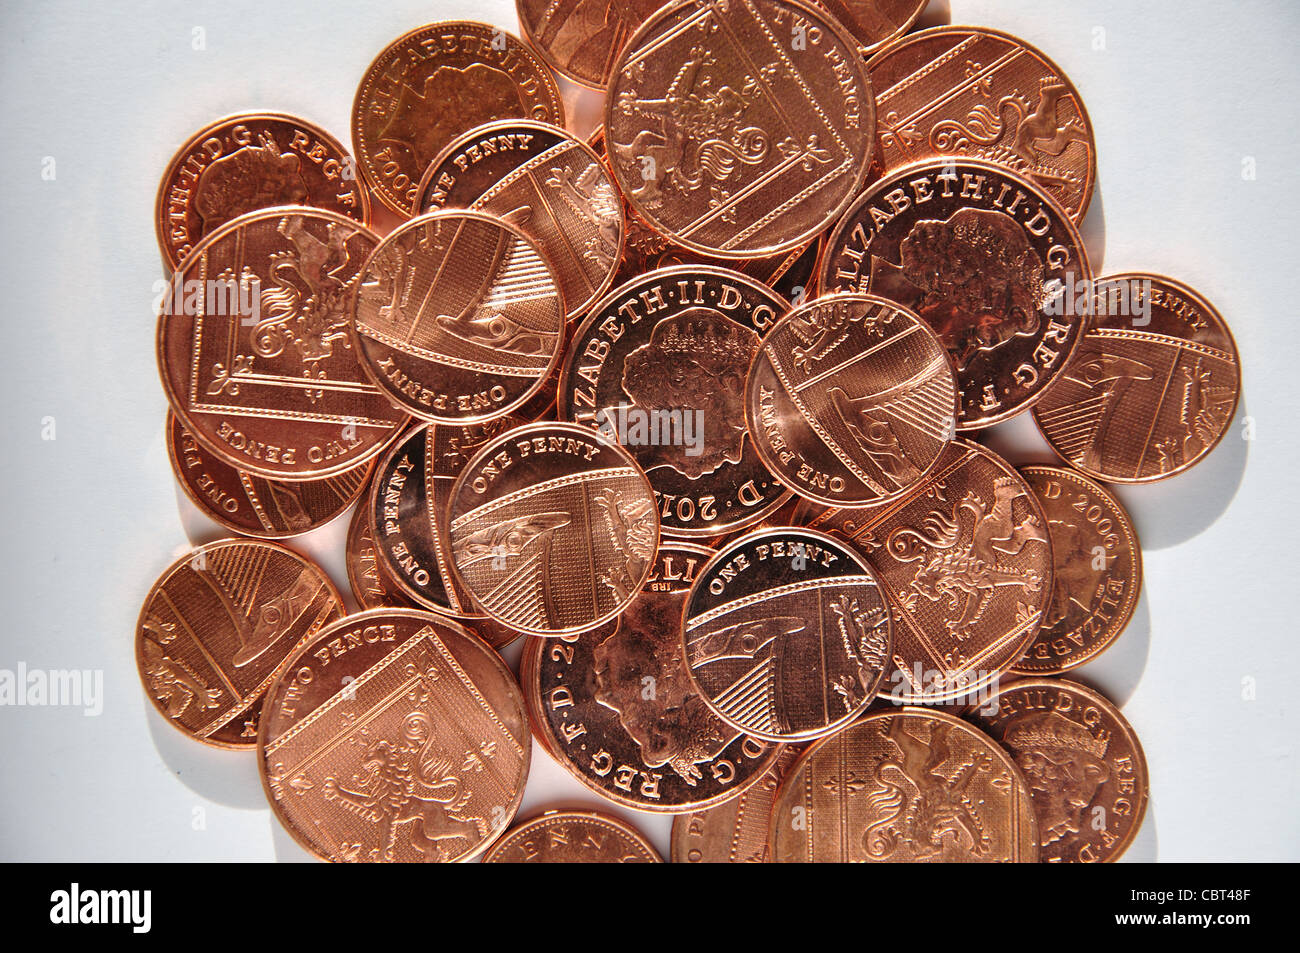 Collection of British new pence, Greater London, England, United Kingdom Stock Photo